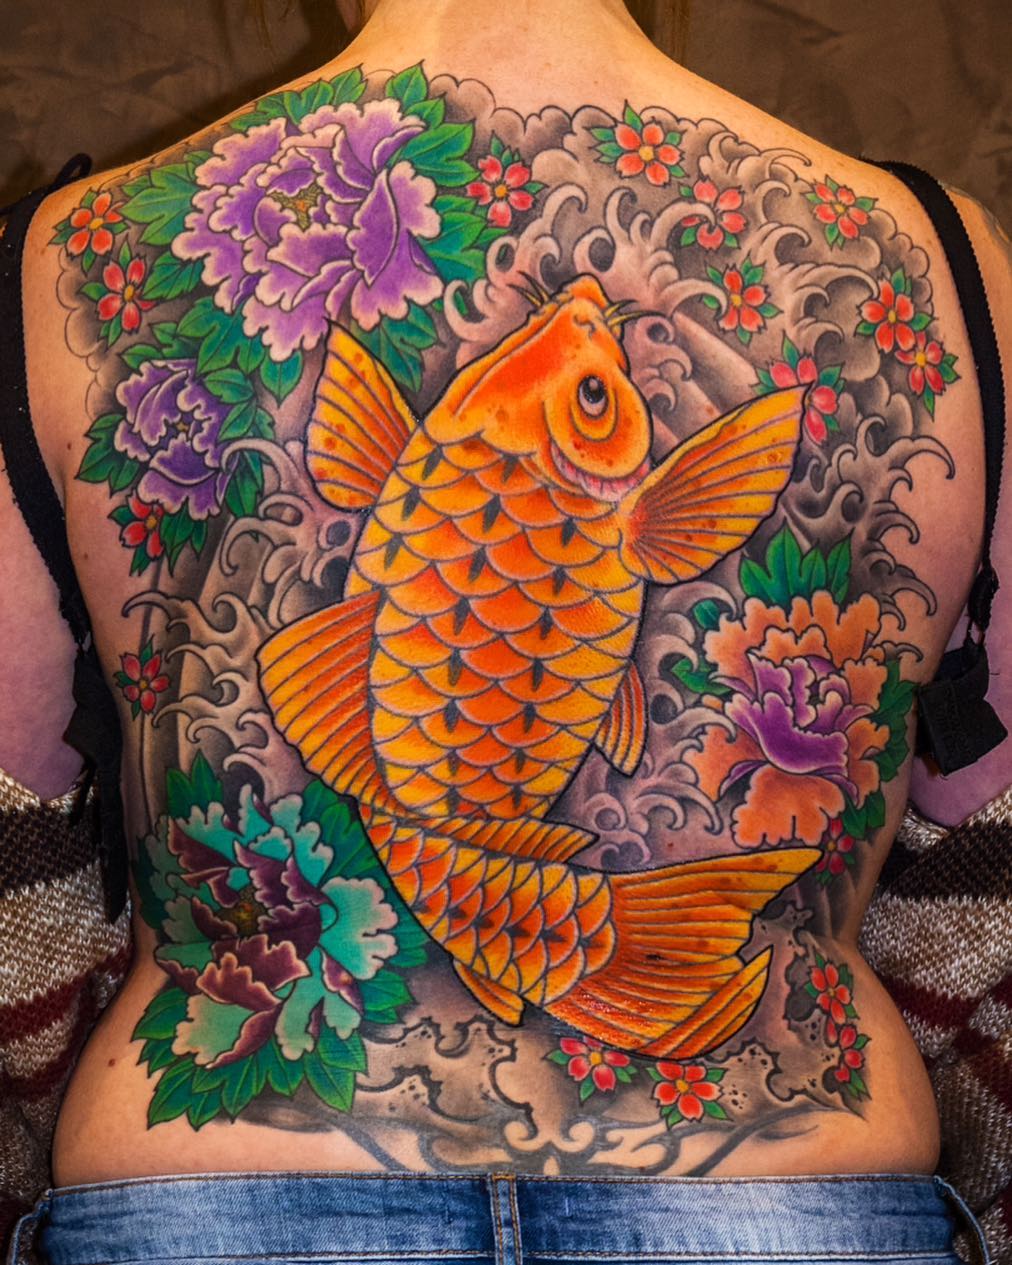 Sarah came to me last year with only outlines of the Koi fish in the middle of h...